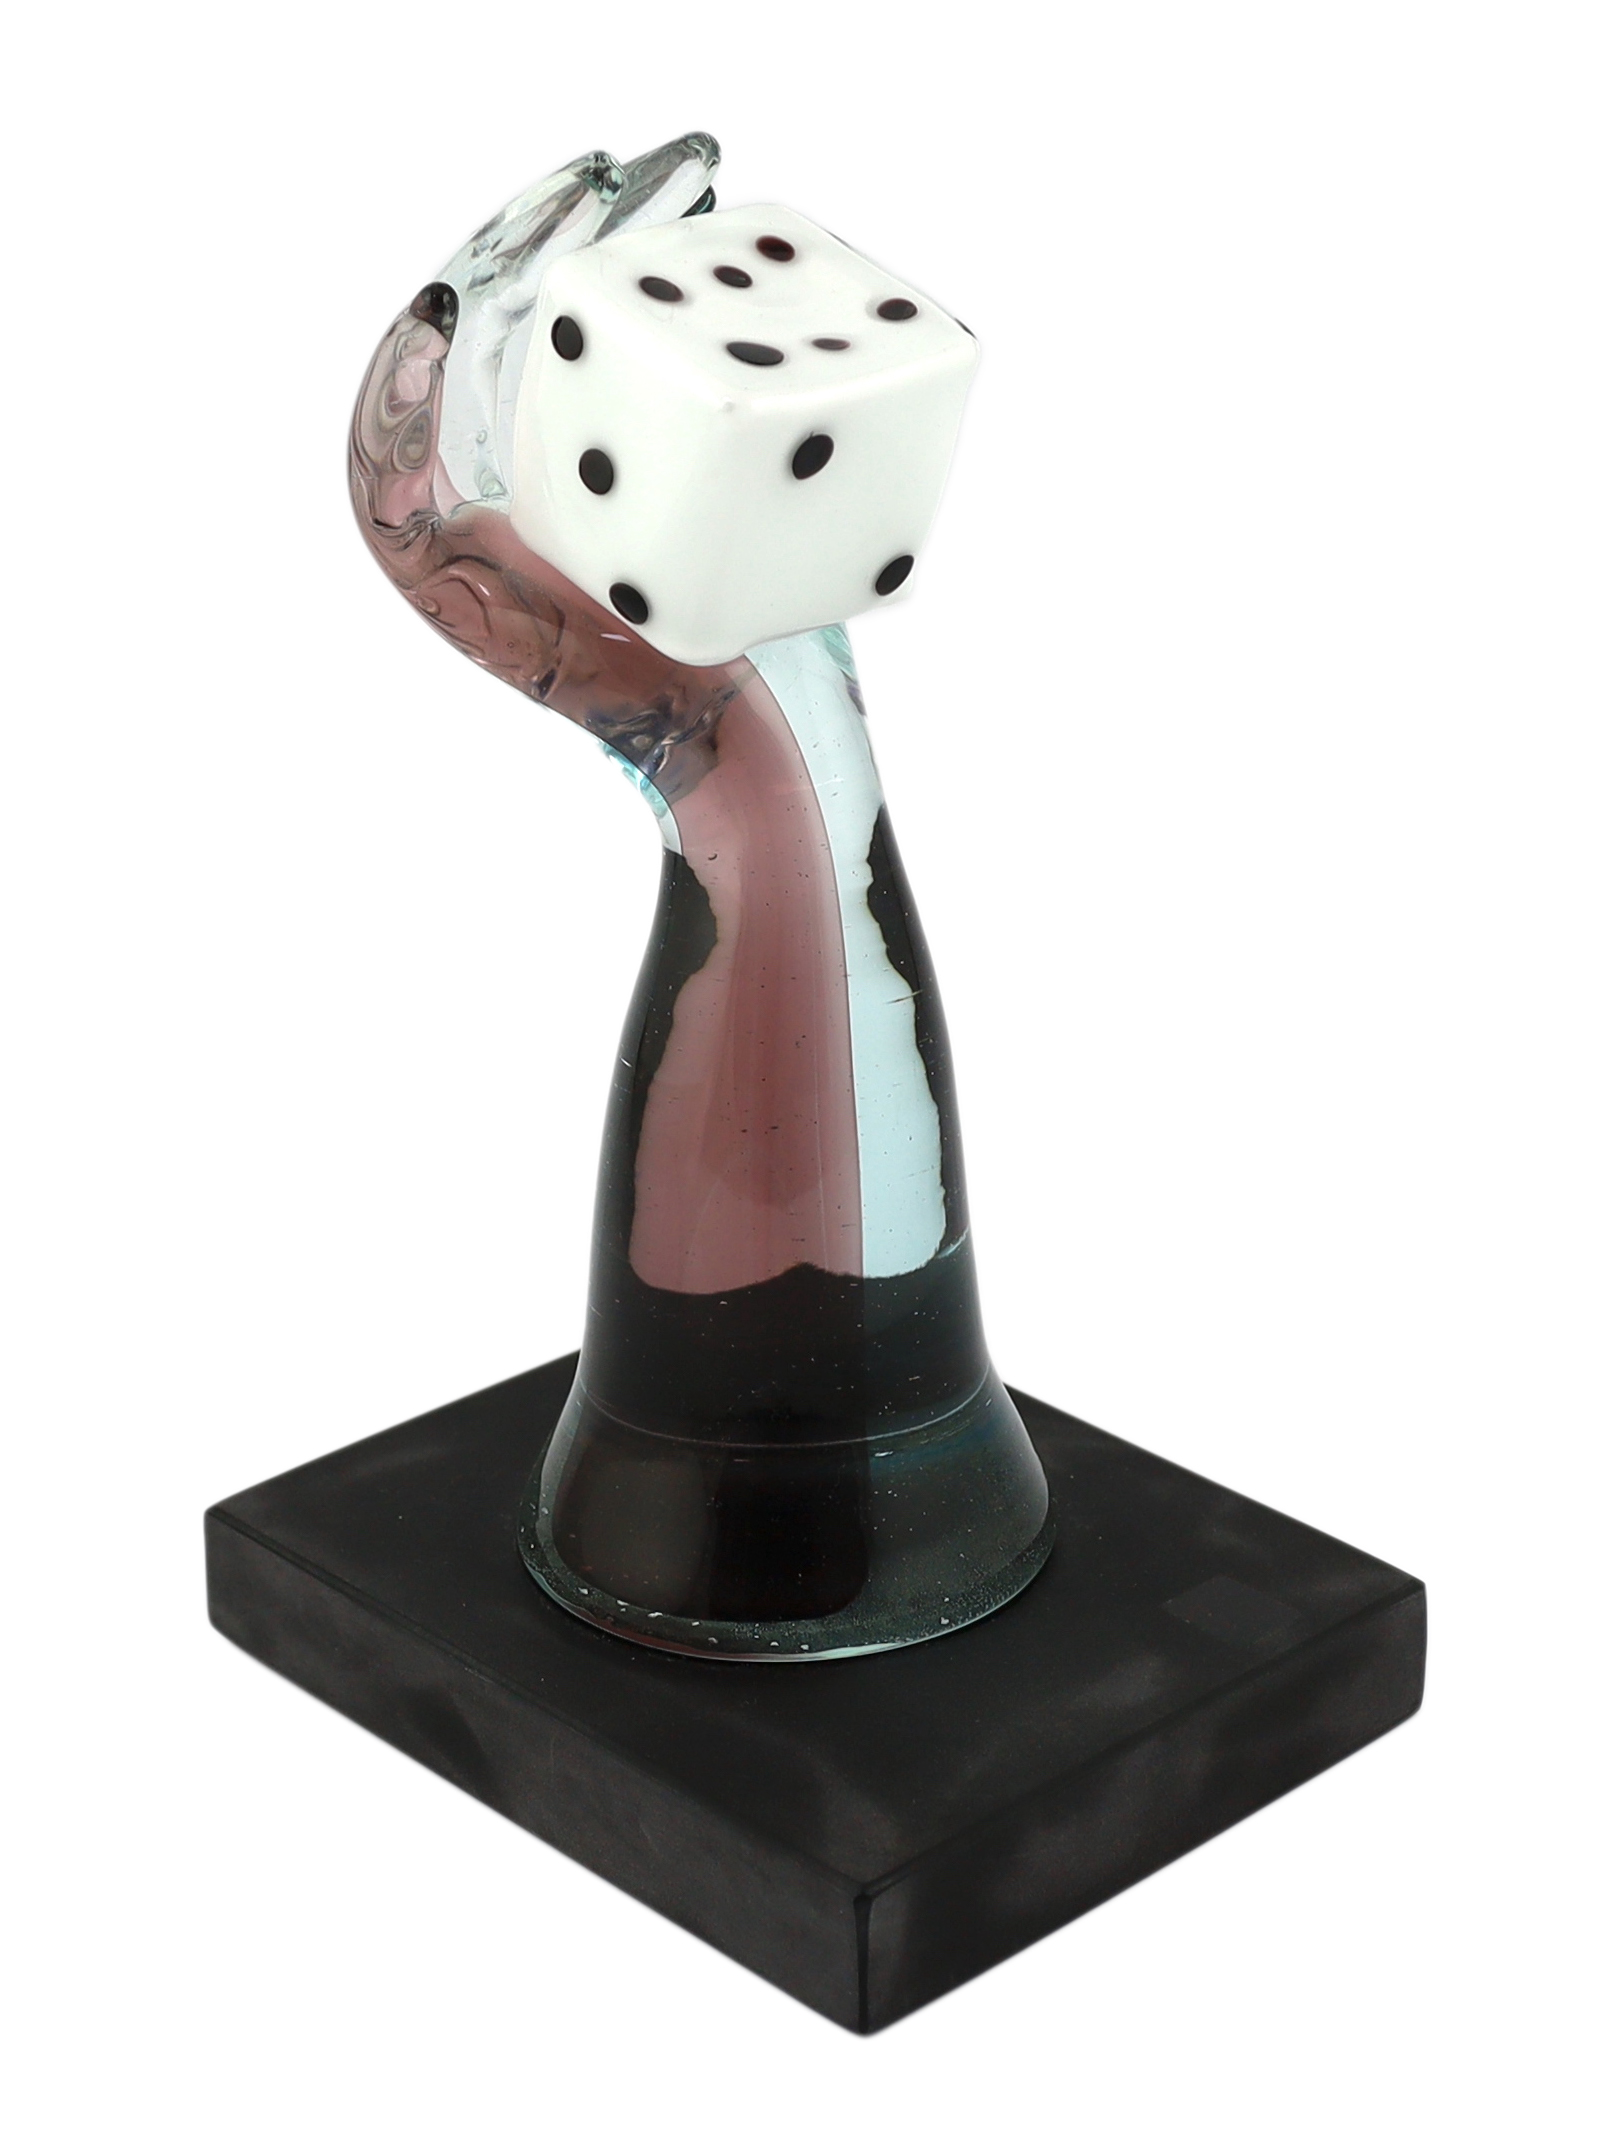 A Murano Vetreria amethyst glass arm, holding a white, black spotted, dice in hand                                                                                                                                          